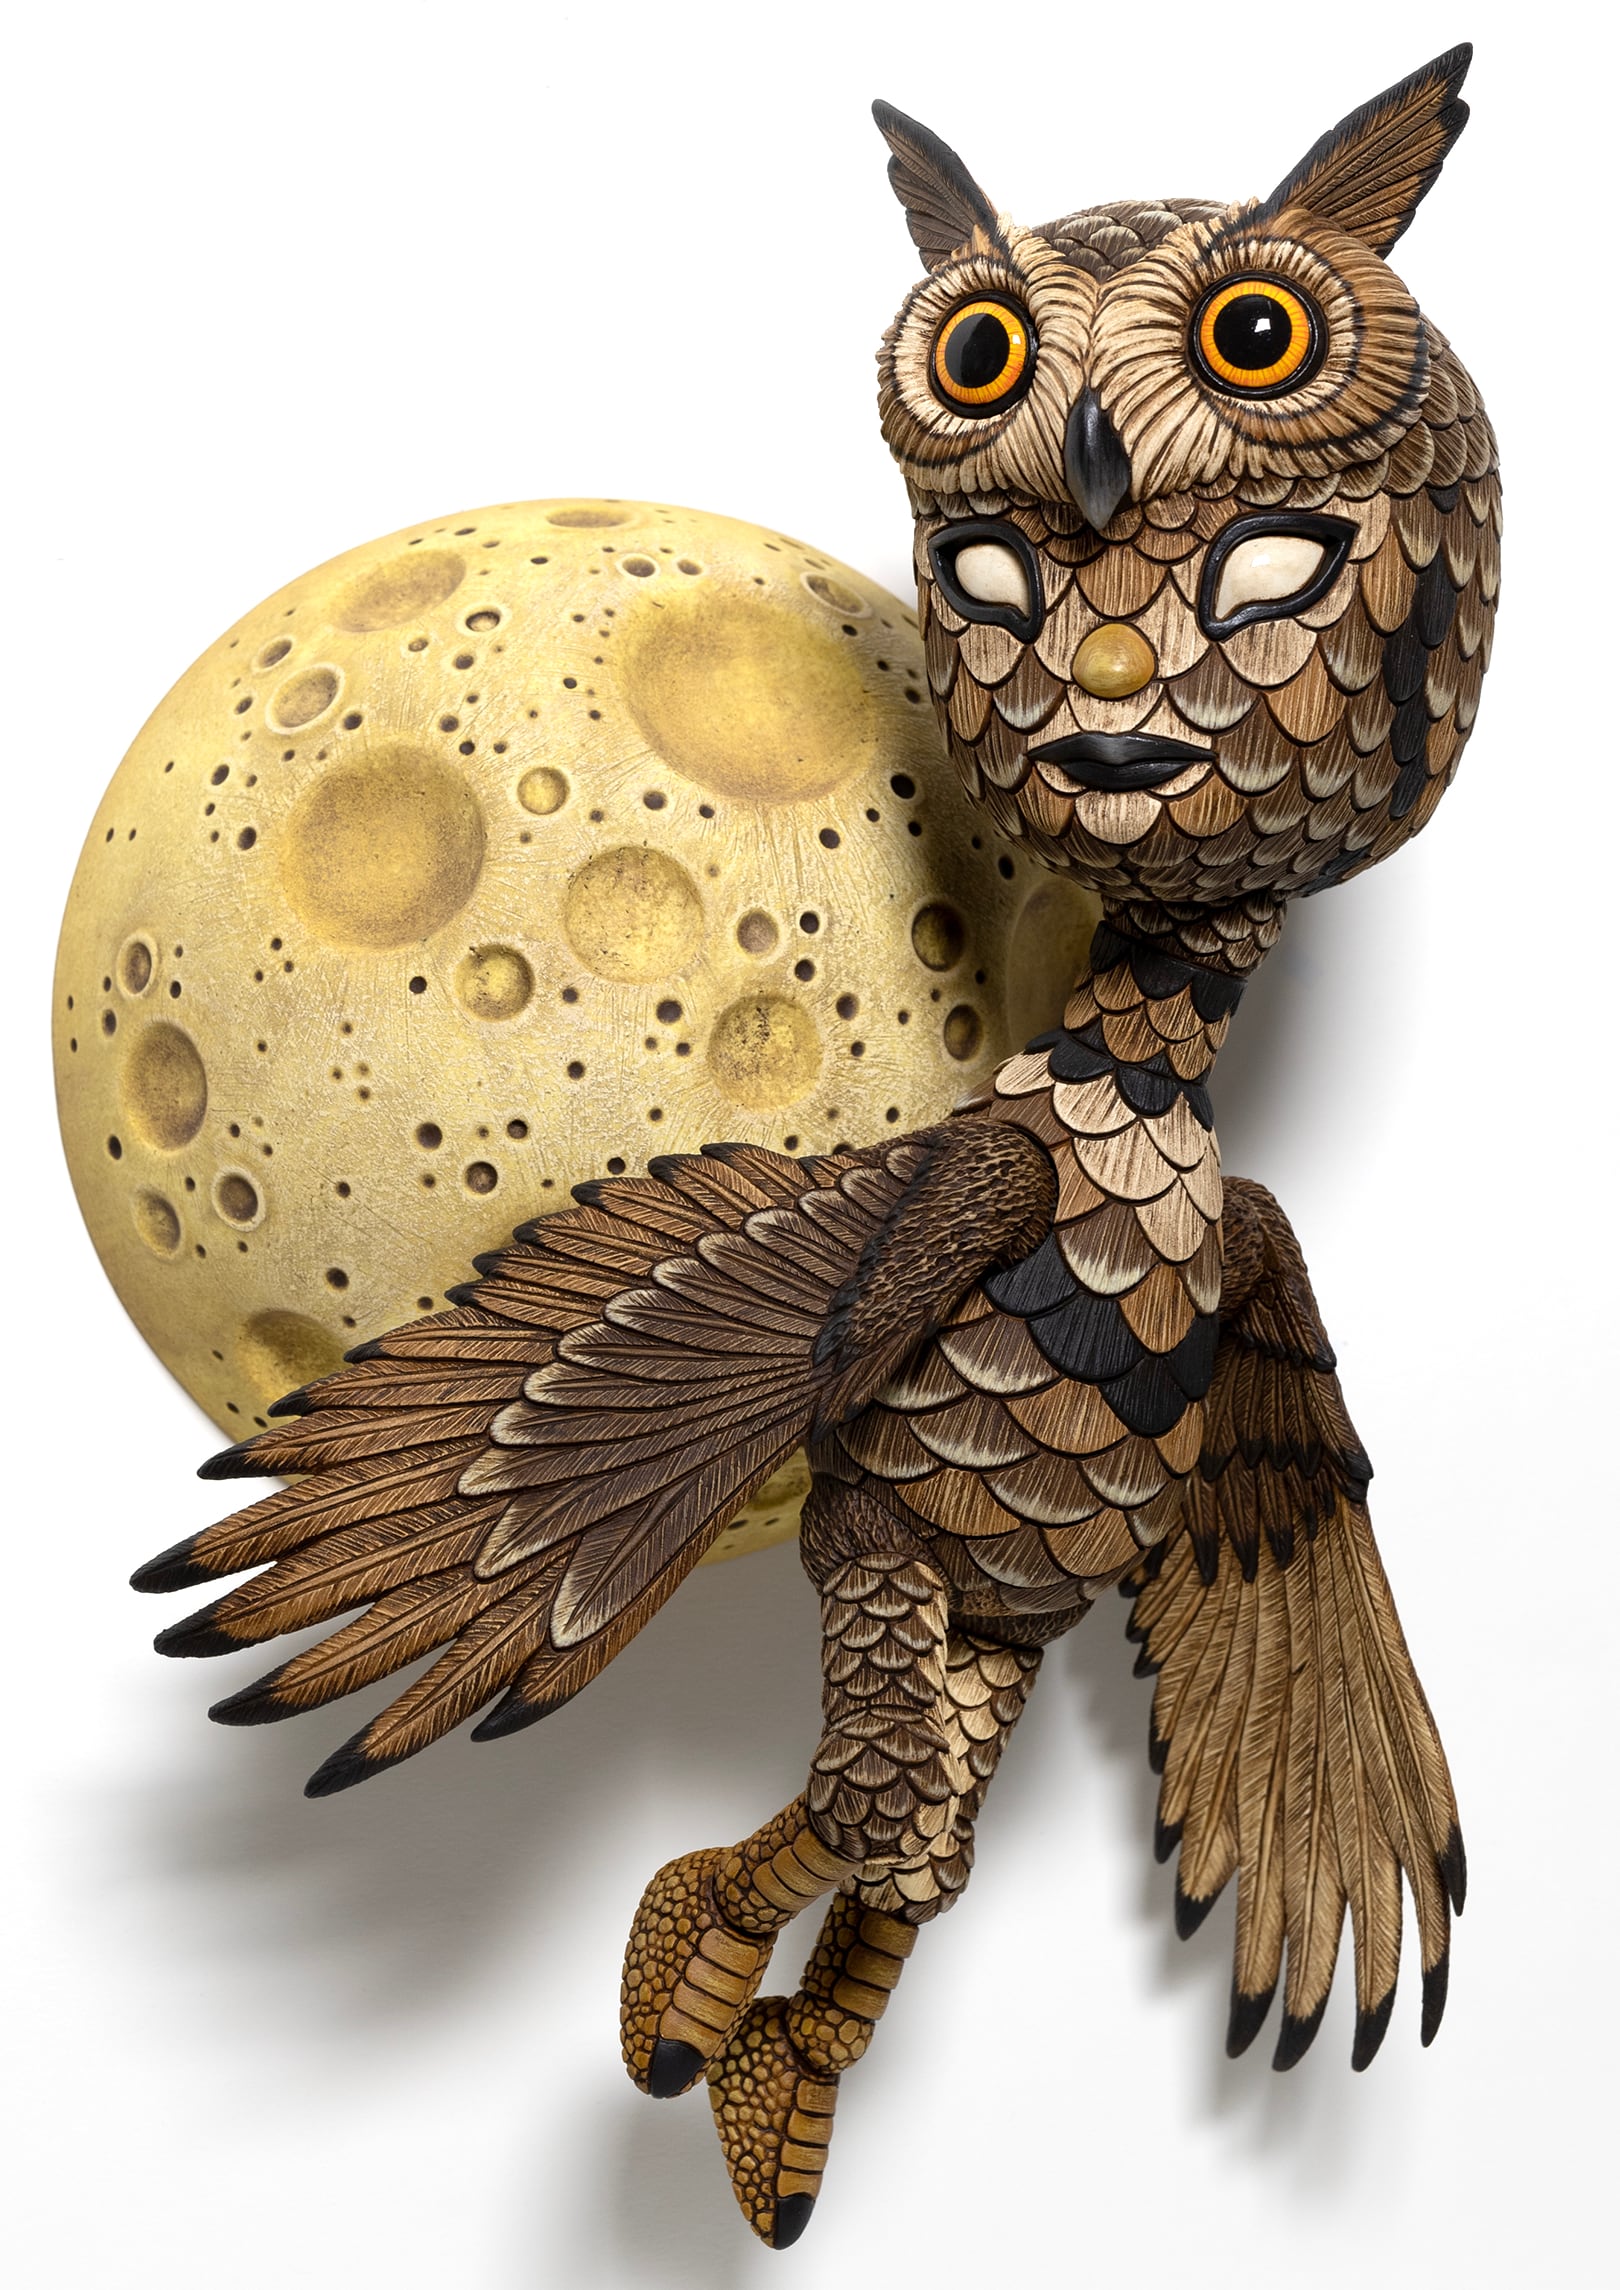 A ceramic sculpture of a figure camouflaged as an owl.